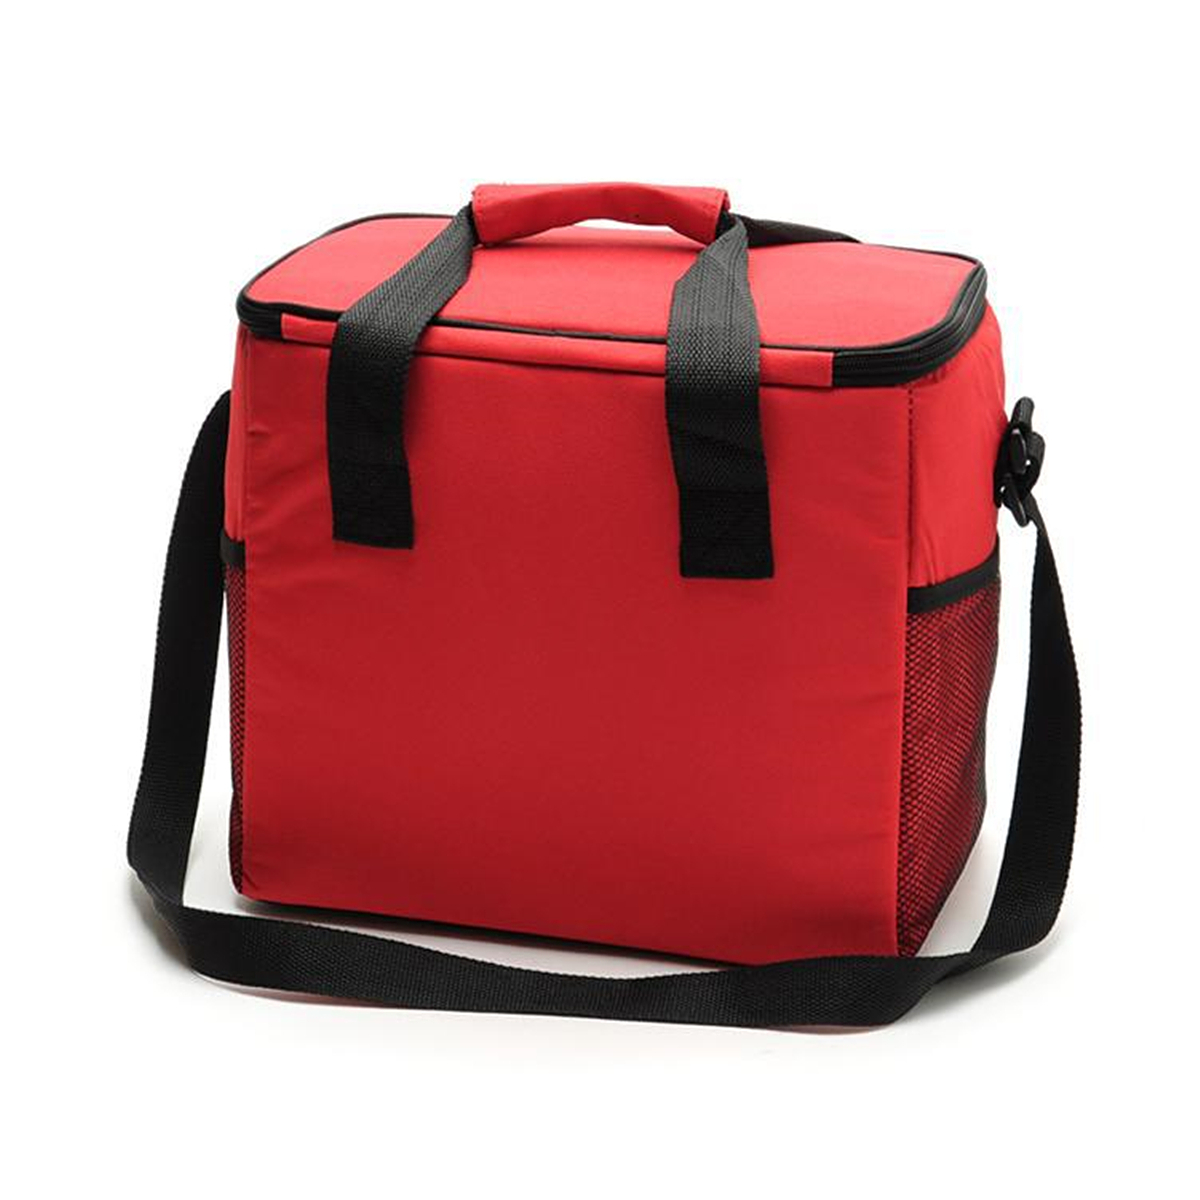 Large-Insulated-Cooler-Cool-Bag-Outdoor-Camping-Picnic-Lunch-Shoulder-Hand-Bag-1186956-5